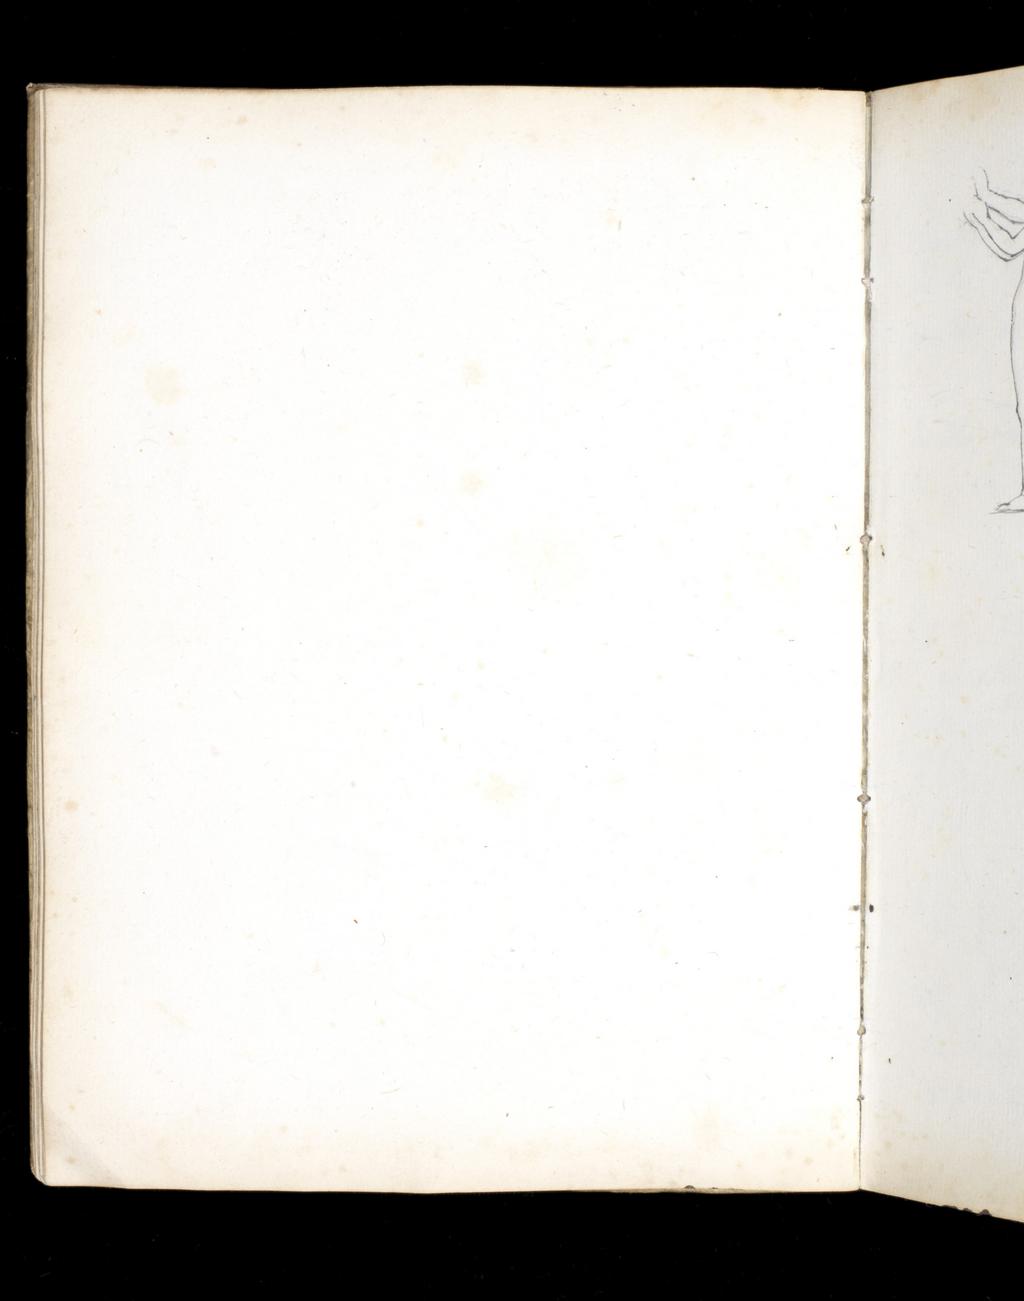 An image of Sketchbook: Motion and Equilibrium of the Human Body. Flaxman, John (British, 1755-1826). Sketchbook bound in ?pig's skin, containing 60 leaves plus two endpapers. Height, leaf, 230 mm, width, leaf, 171 mm; height, cover board, 232 mm, width, cover board, 173 mm.